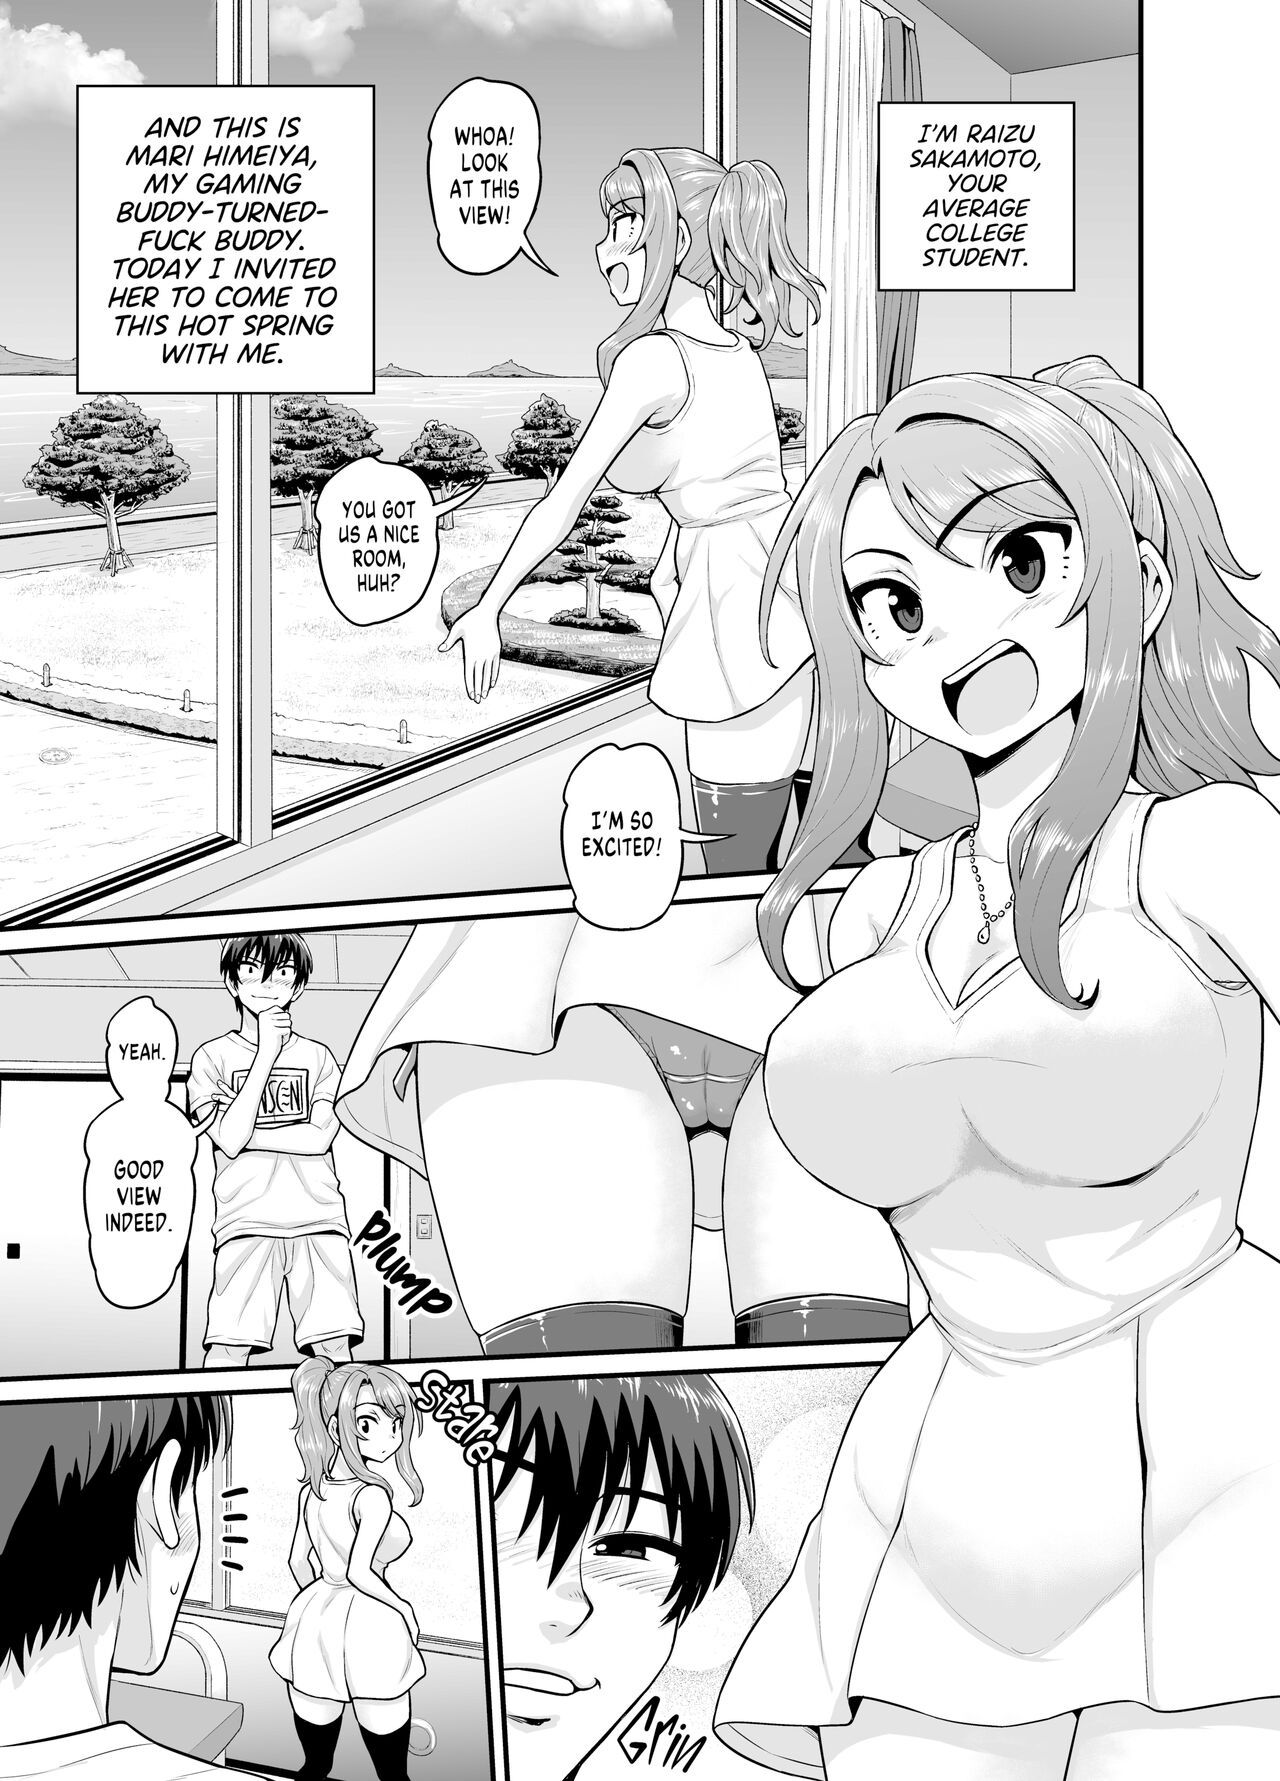 English 3x Hot - Getting it On With Your Gaming Buddy at the Hot Spring Porn Comic english  02 - Porn Comic